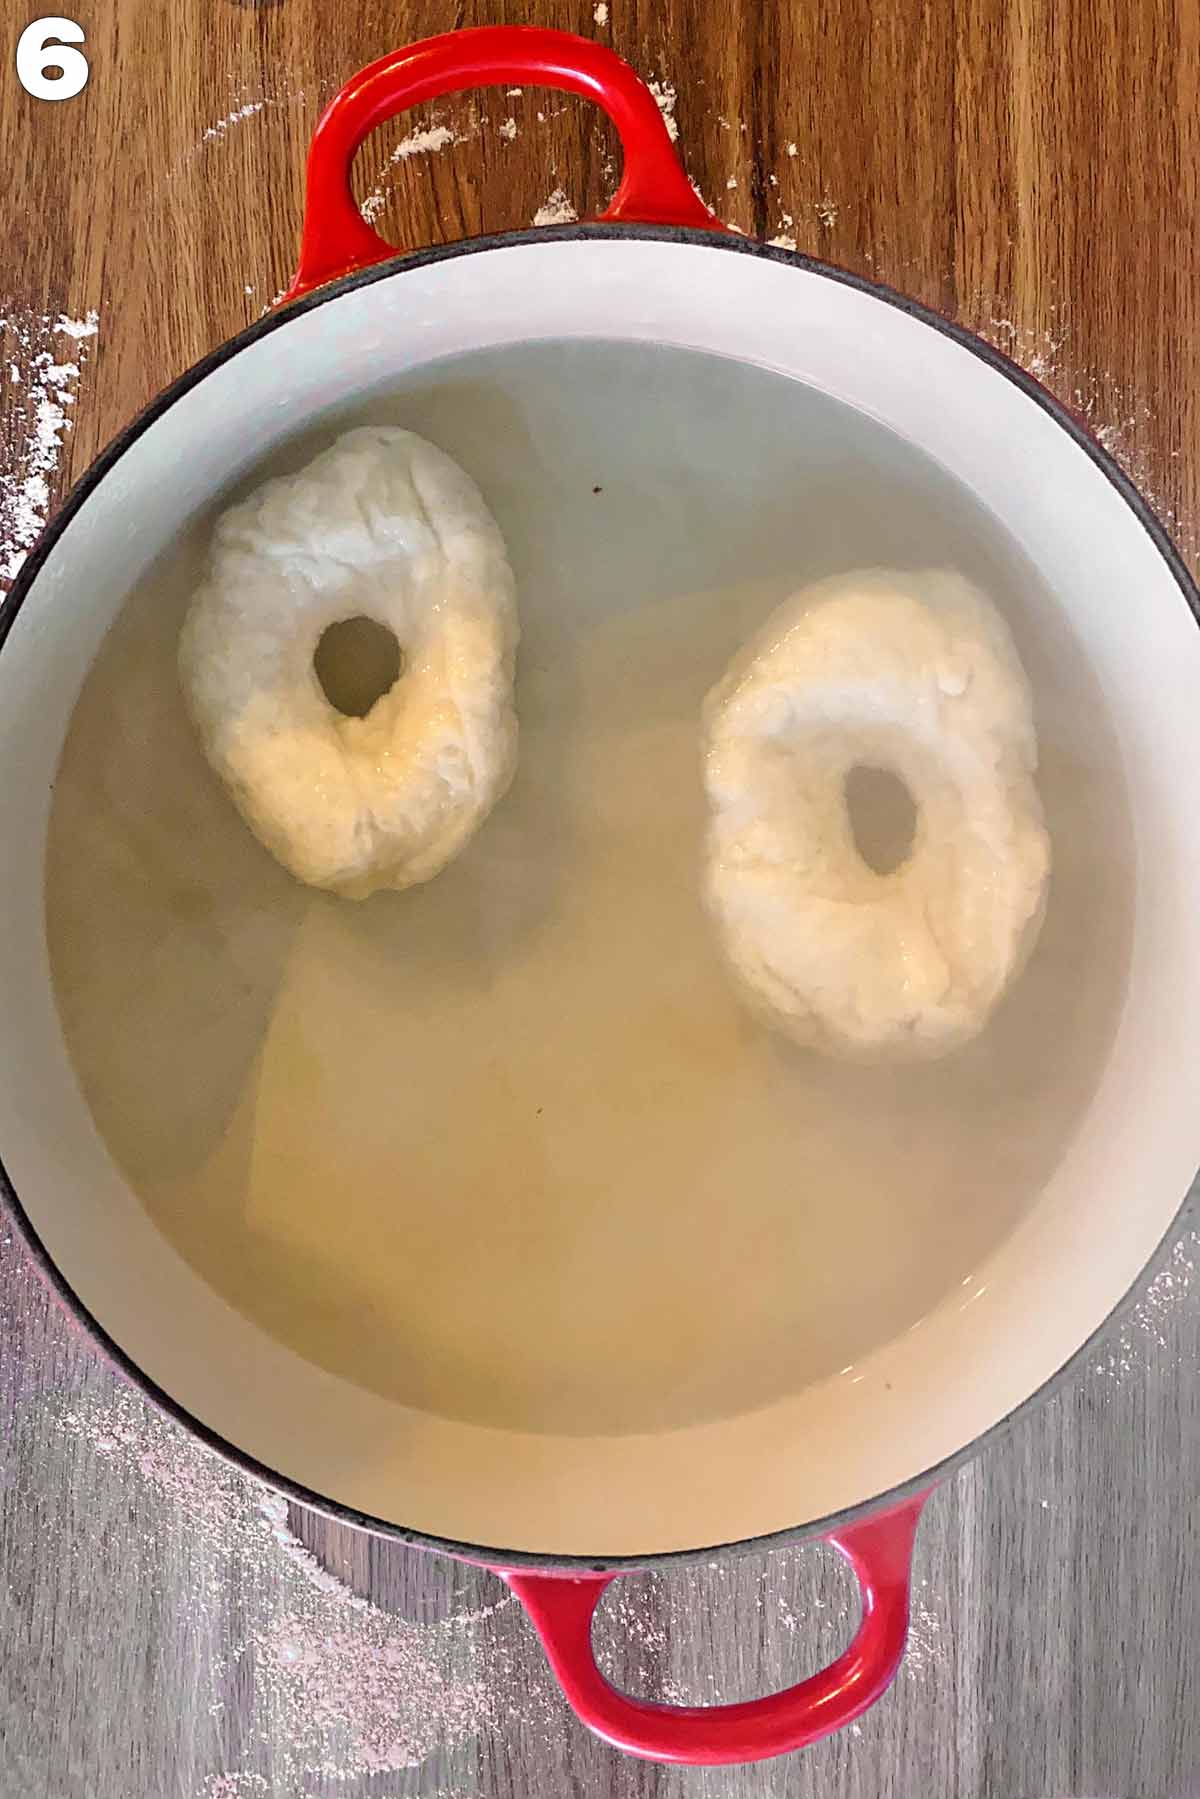 A pan of water with two uncooked bagels floating in it.